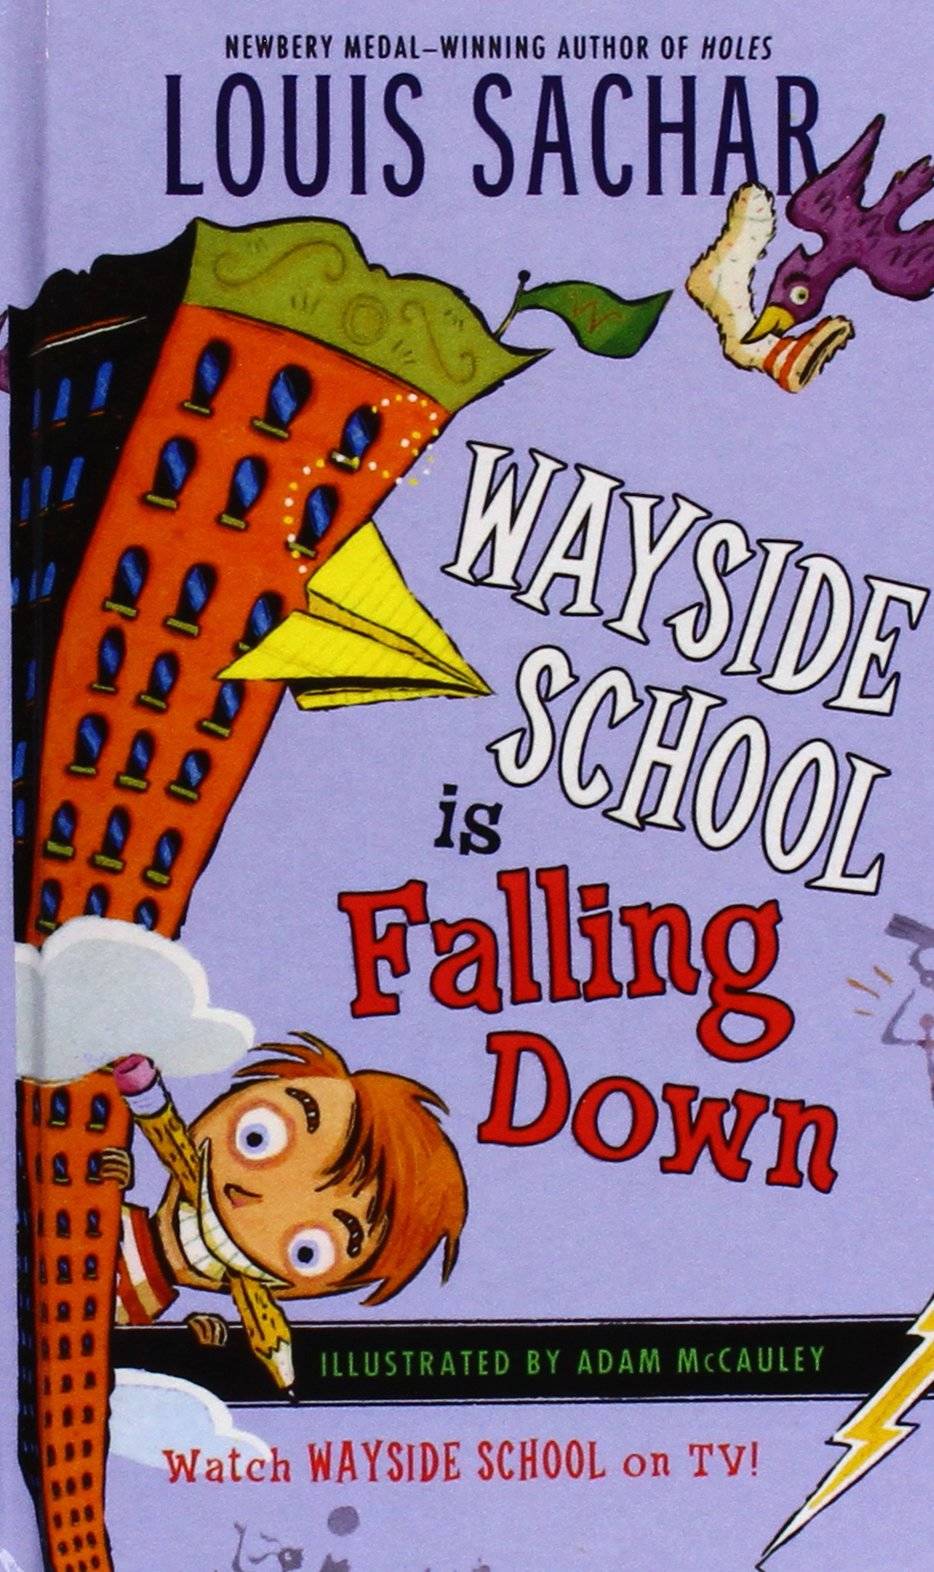 <p>The <i>Wayside School </i>series is about a school that was built <i>sideways </i>when the architect misread the blueprints, resulting in a wobbly 30-floor tower (minus floor 19 of course).</p> <p>The ridiculousness of the story only gets weirder when you meet the students who each have their own quirks. The stories promote creativity on the highest level—the 30th level, some might say.</p>